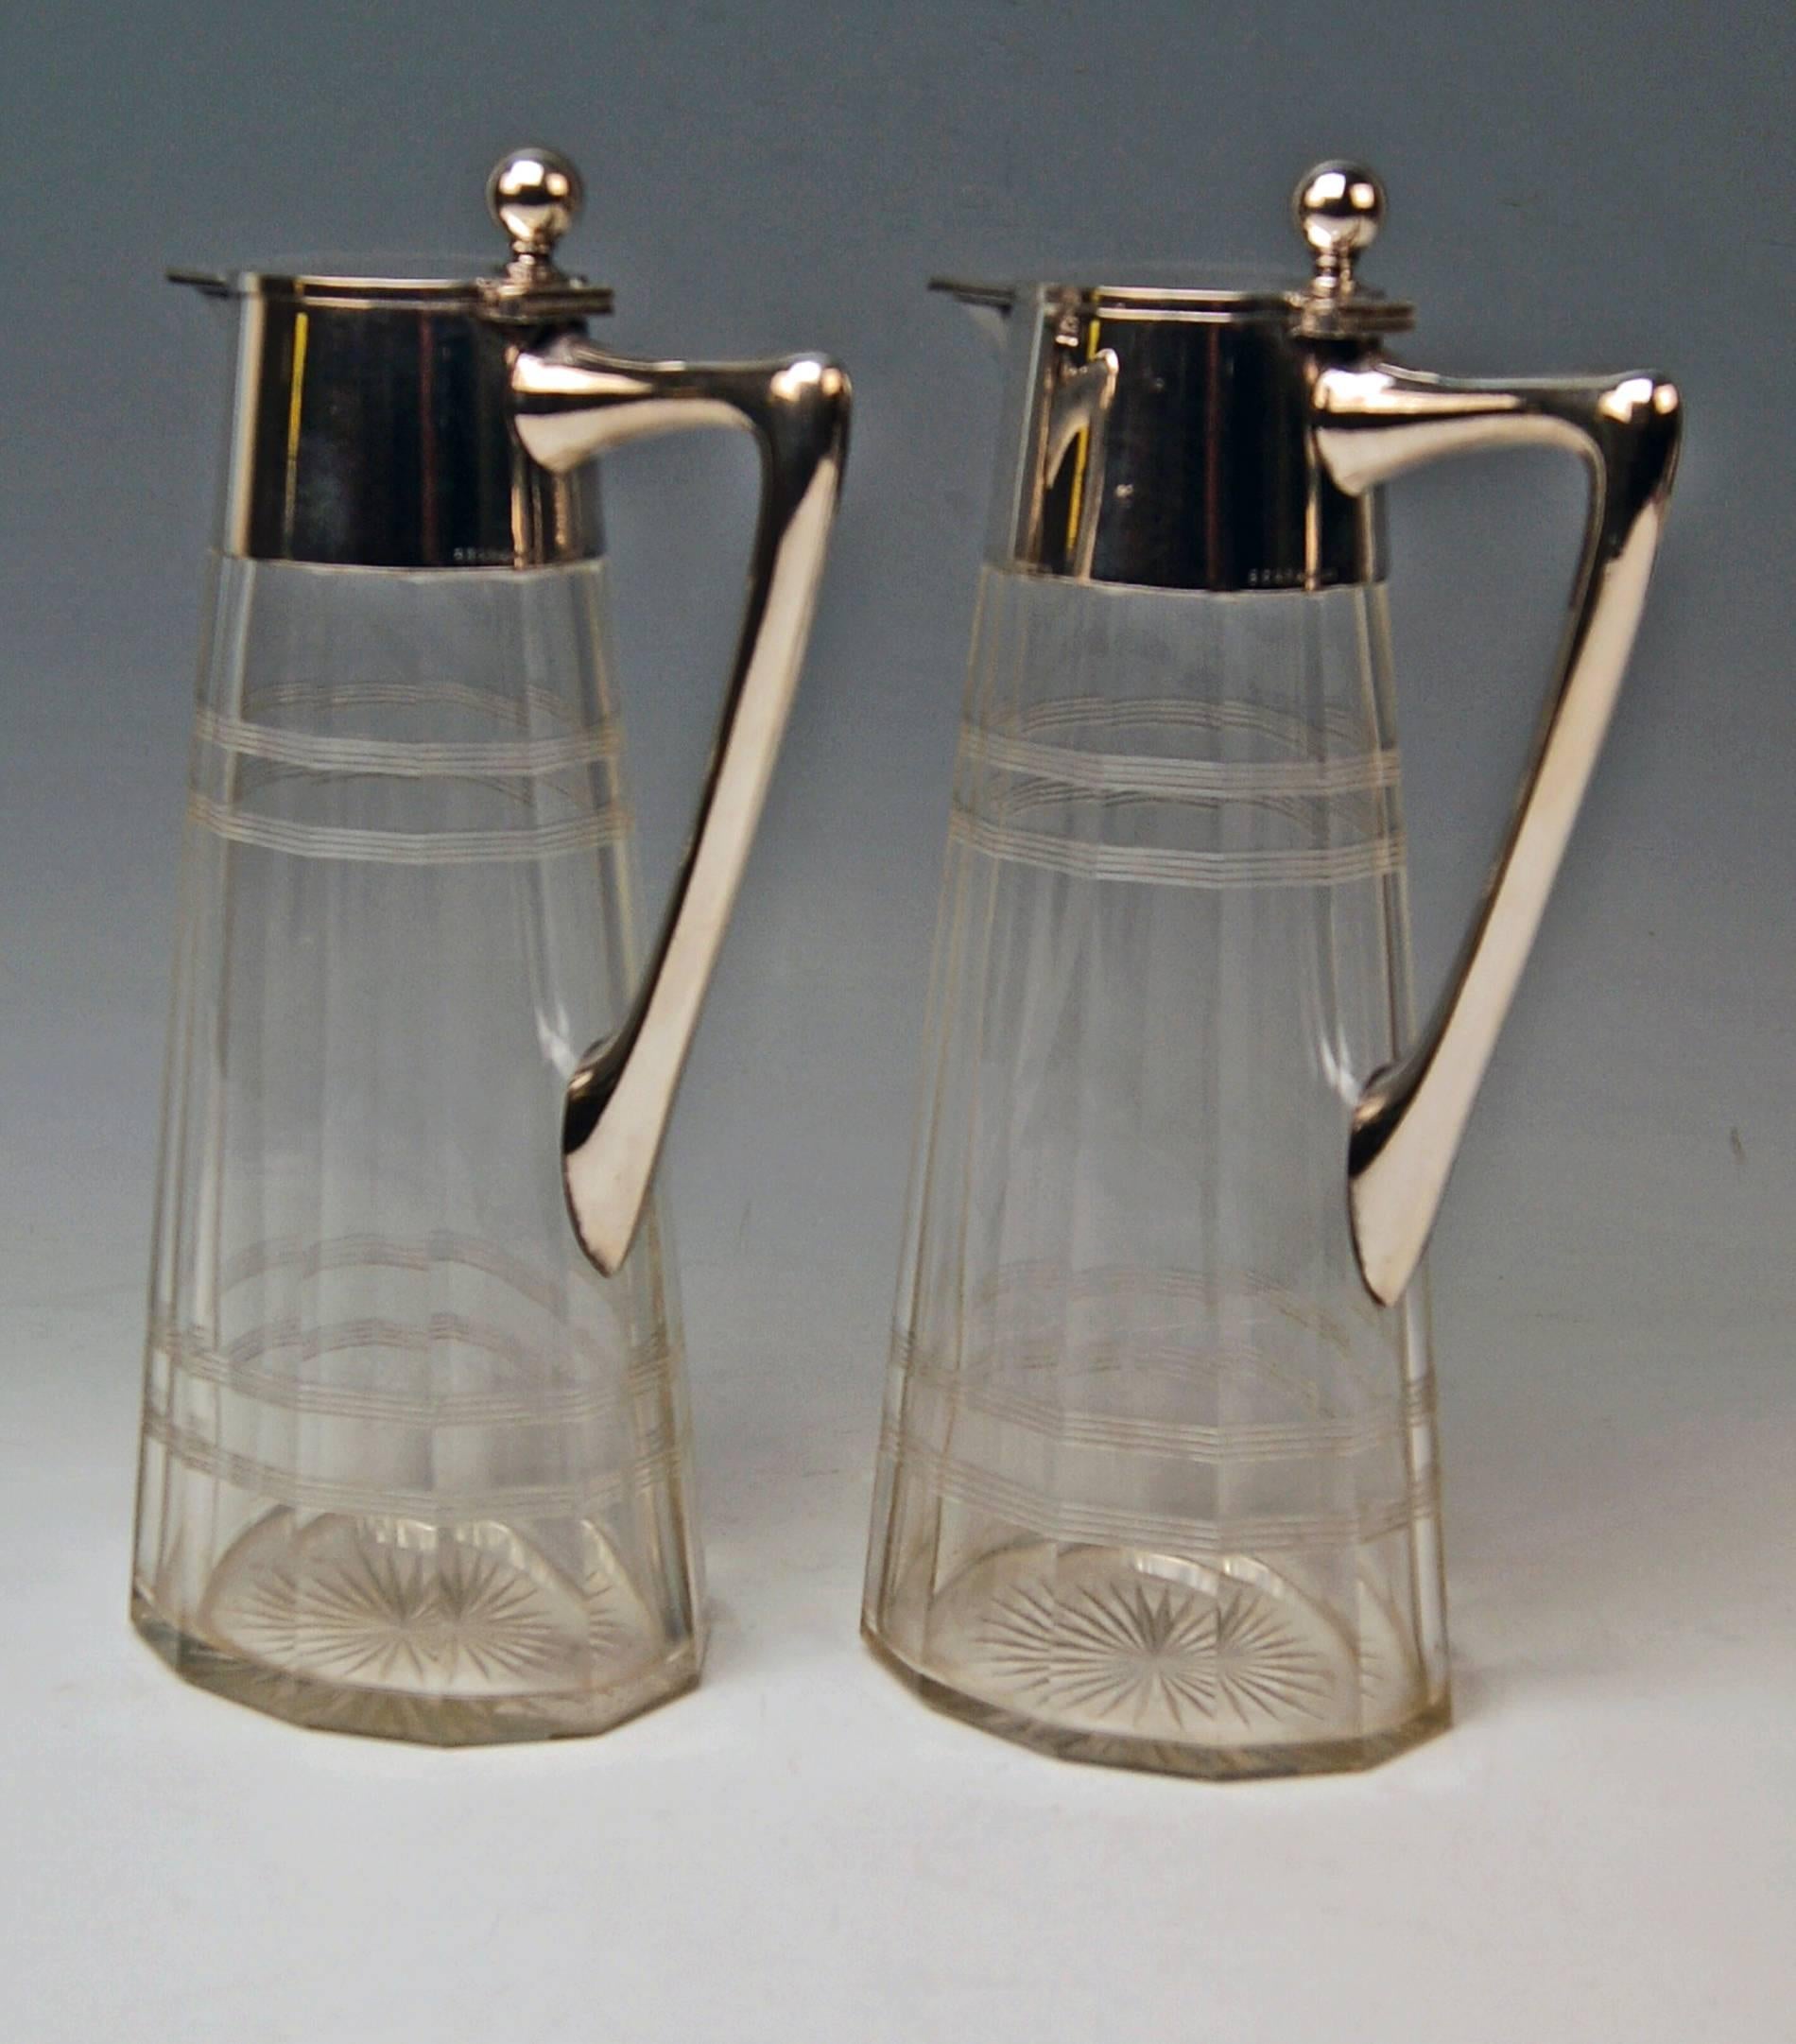 A pair of Art Nouveau glass decanters (Carafes) with silver mountings.
Hallmarked:
Mark WTB: Germany/Schwaebisch Gmuend, manufactory Wilhelm Binder, number 8329.
Silver 800.
German official silver stamp: Crescent with moon.

Made, circa